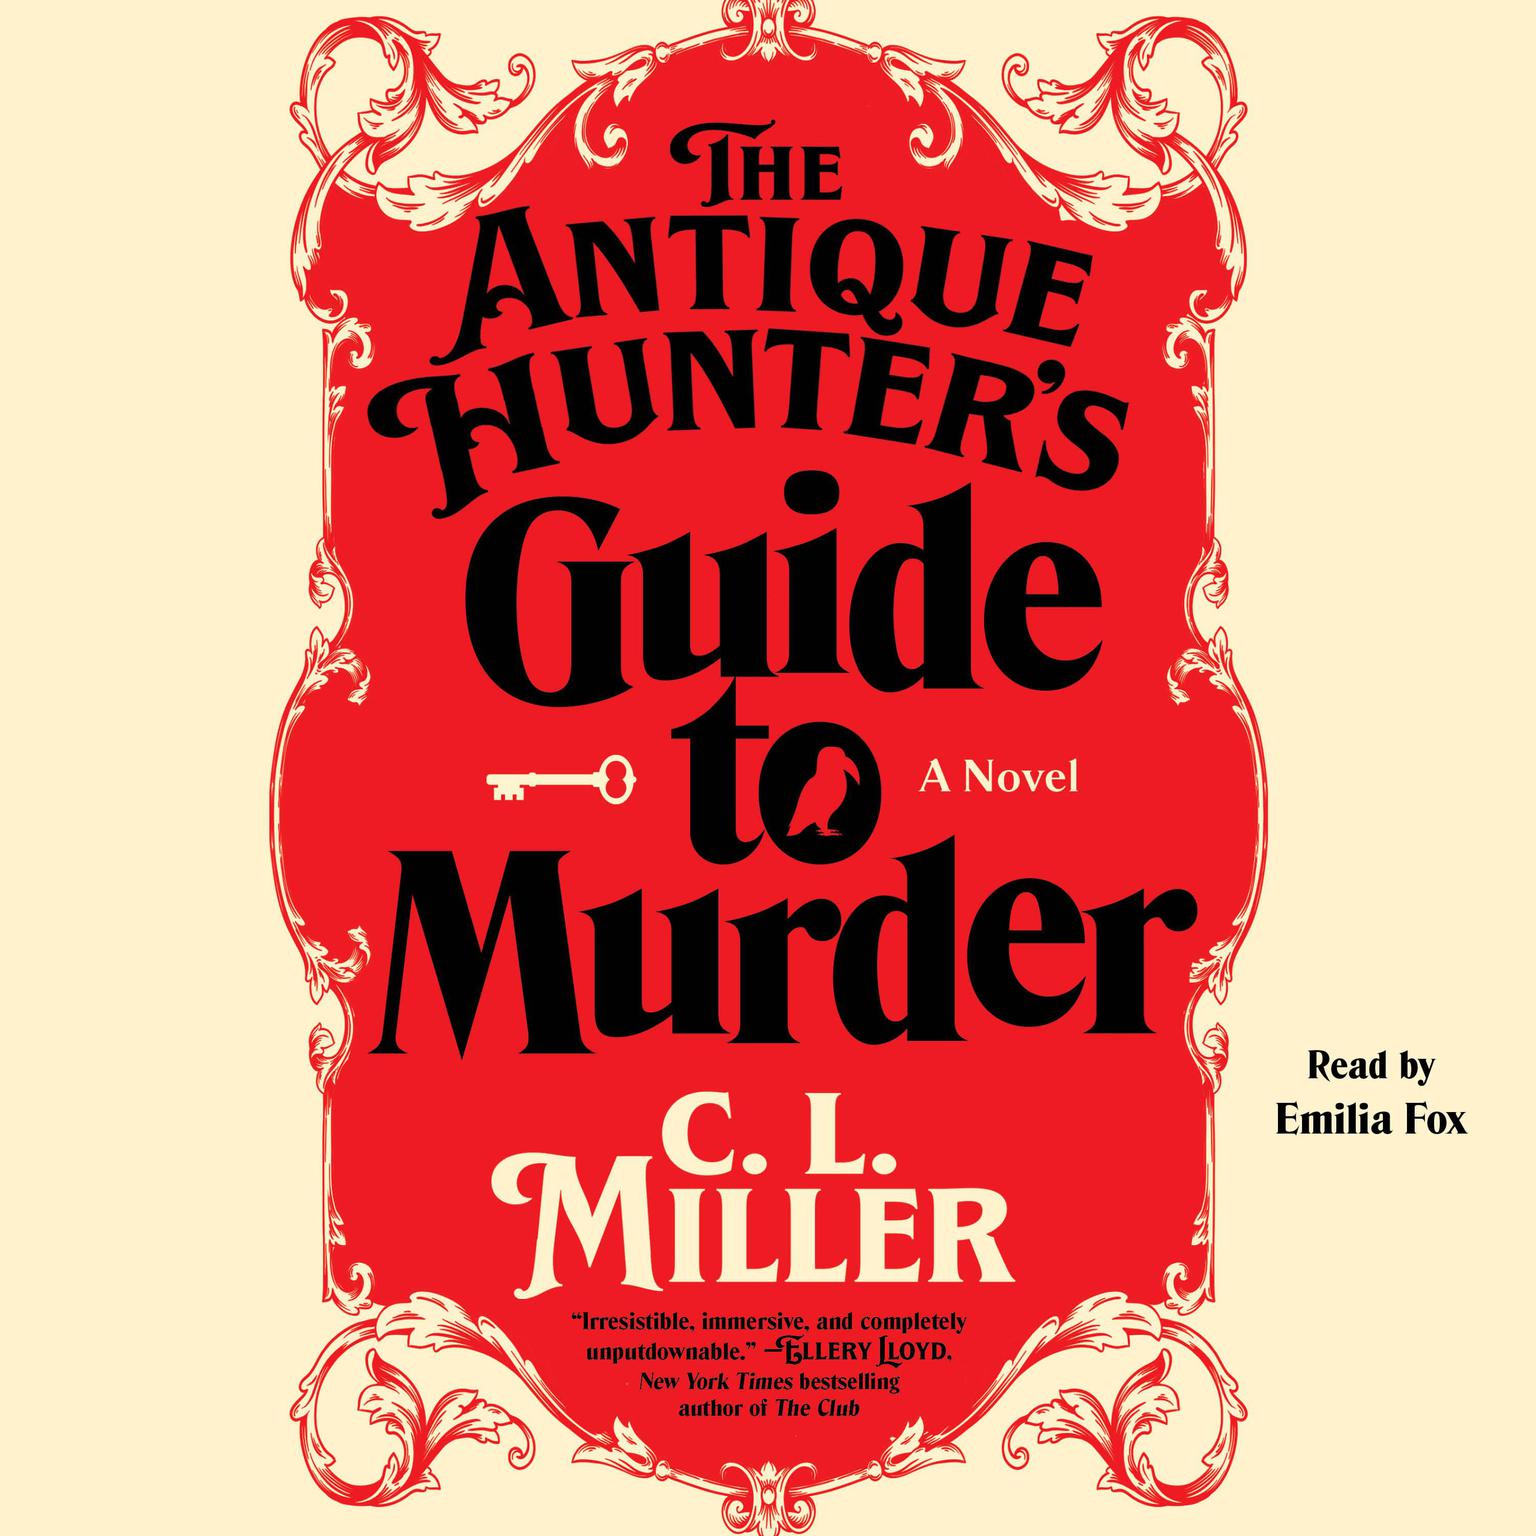 The Antique Hunters Guide to Murder: A Novel Audiobook, by C. L. Miller